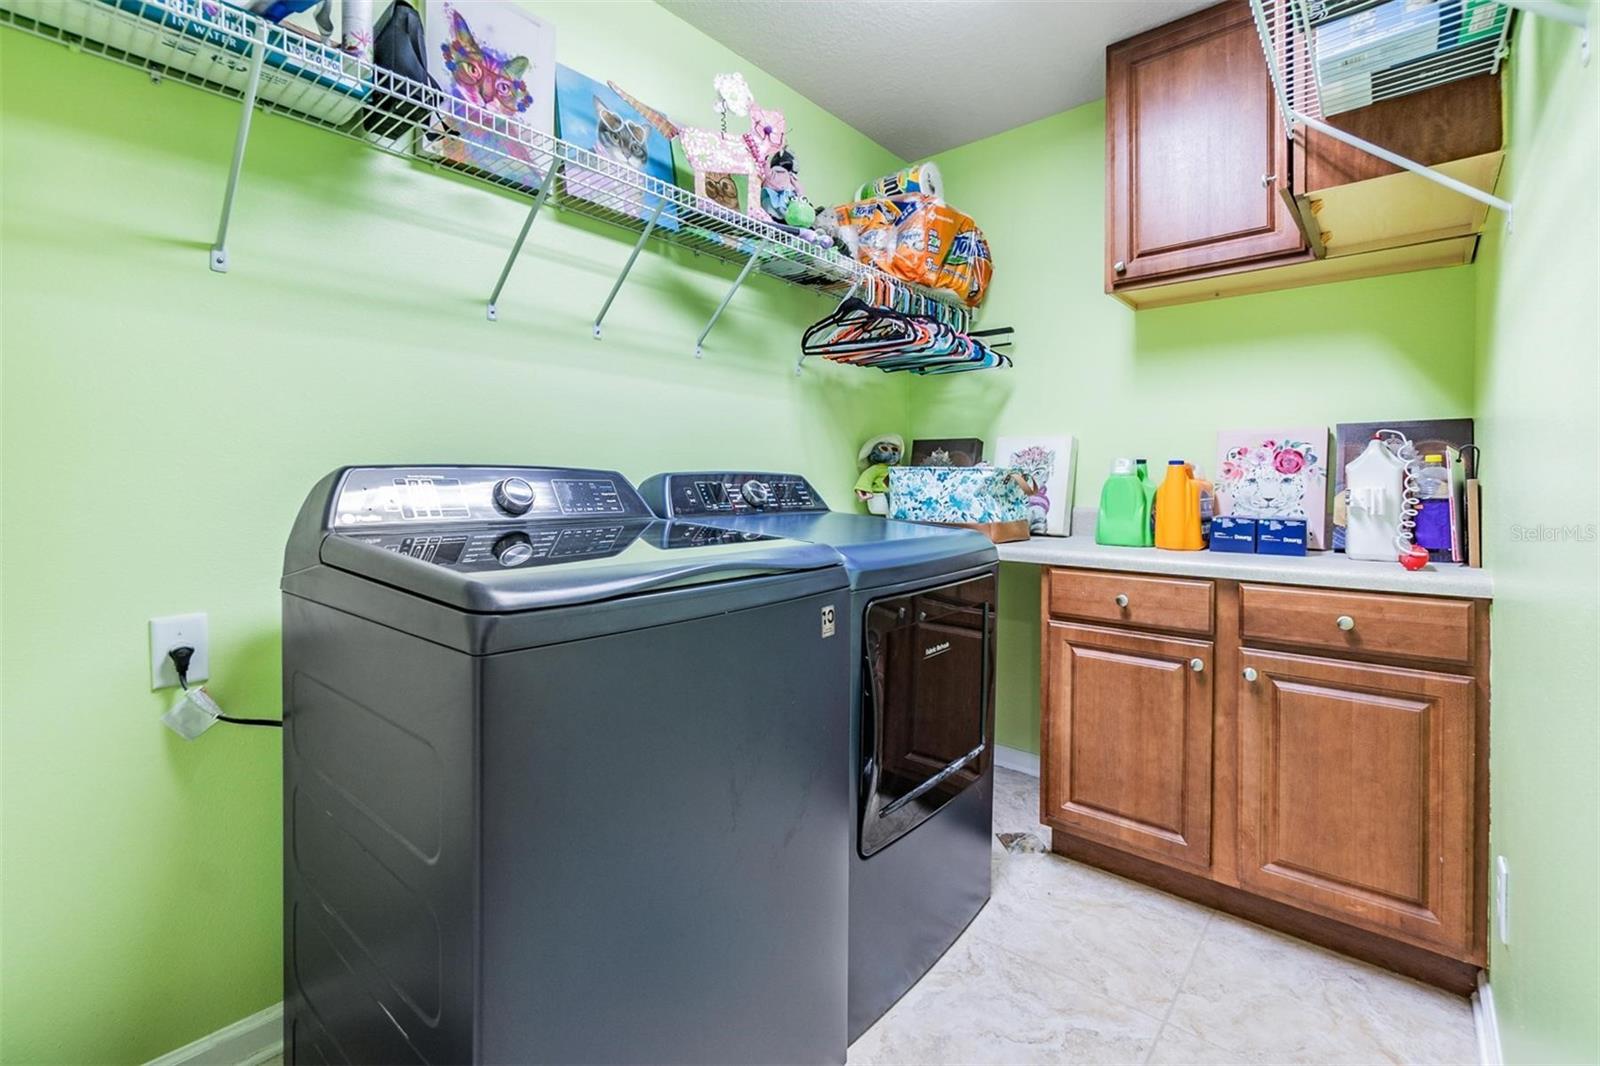 Laundry Room with tile flooring and Cabinet Space.